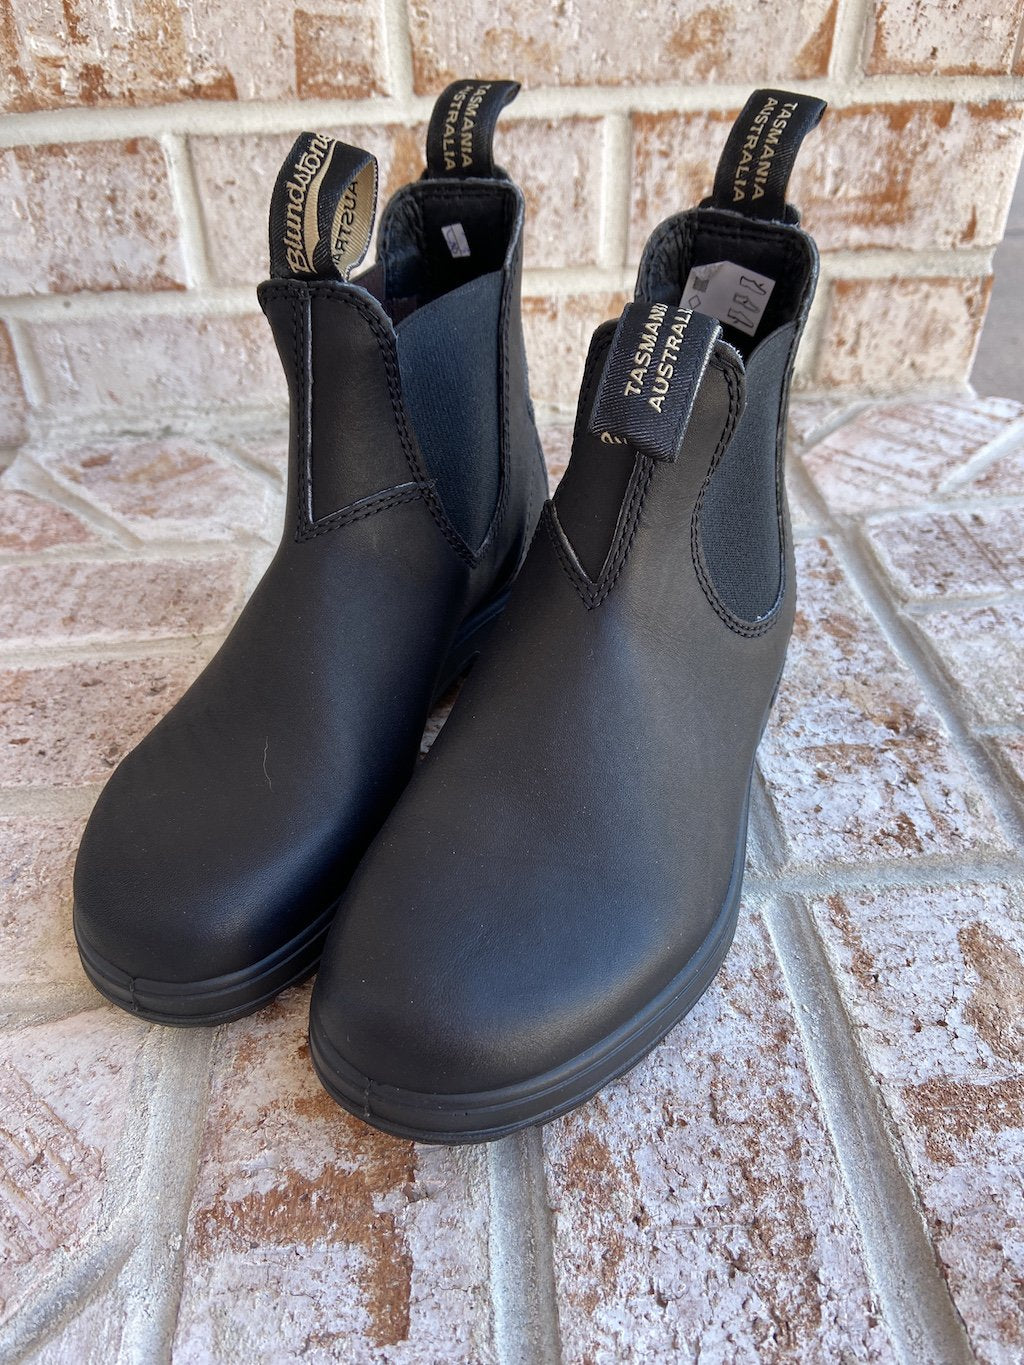 blundstone boots 510